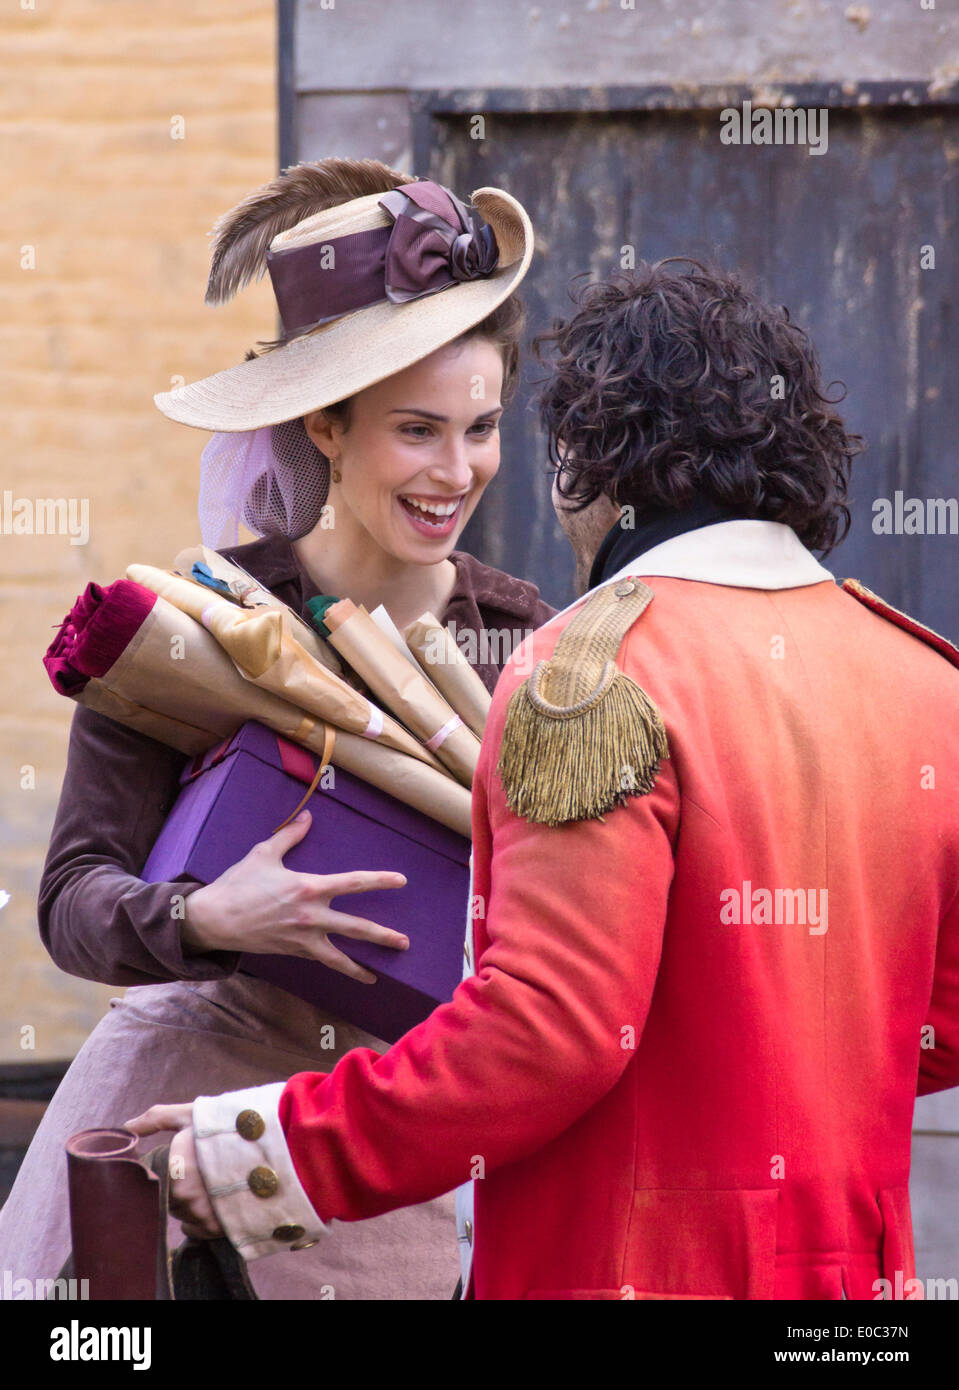 Corsham Wiltshire 6th May 2014  Filming the BBC drama Poldark on location in Corsham Wiltshire. The BBC have taken over this small country town to remake their hit 1970's drama based upon the works of Winston Graham. Aidan Turner and Heida Reed Credit:  Mr Standfast/Alamy Live News Stock Photo